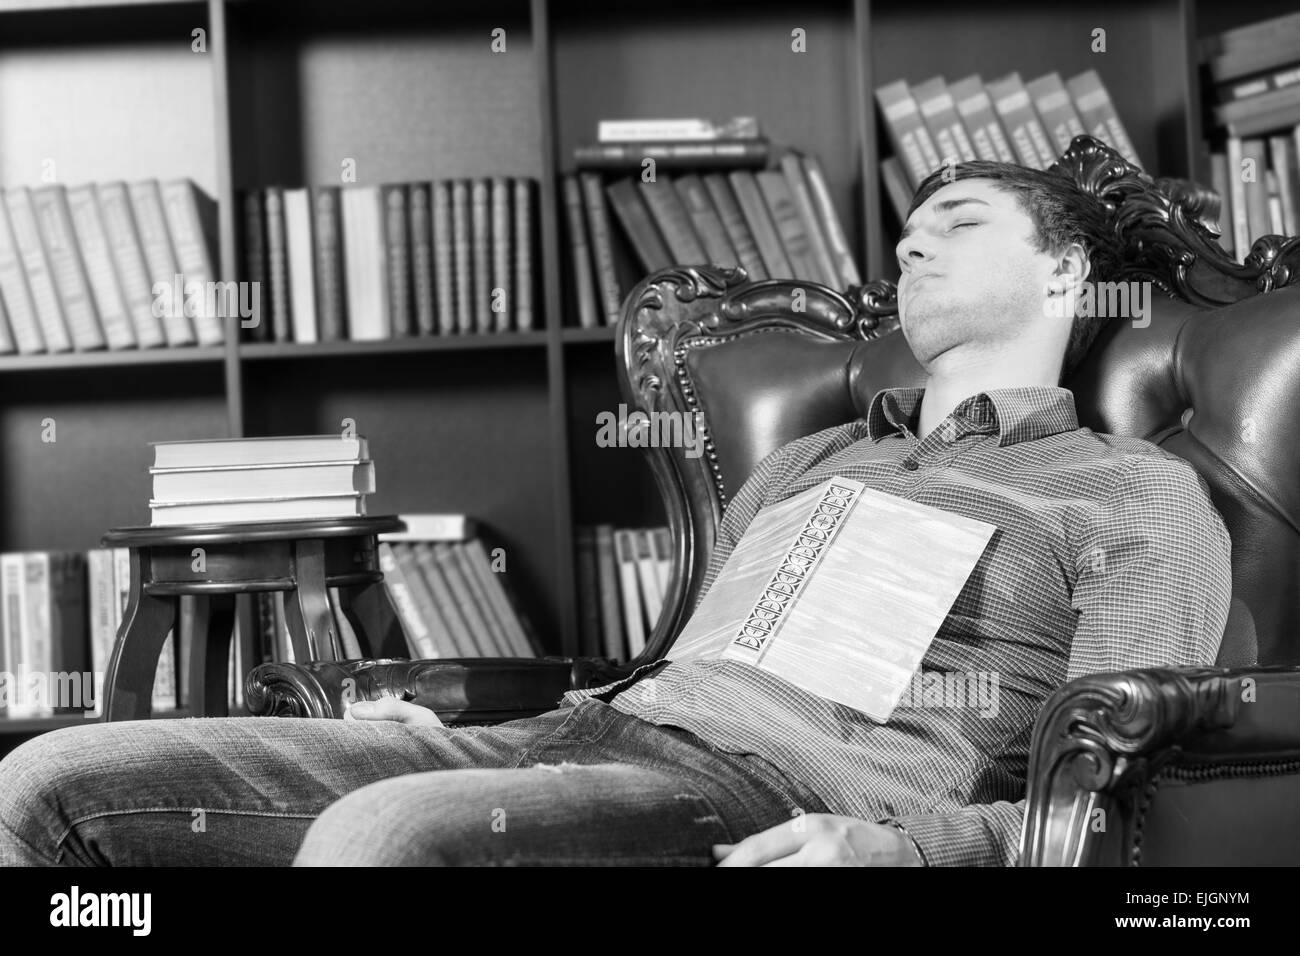 Close up Tired Young Man From Reading Literature Resting on the Chair Near the Bookshelves with Book Lying on his Chest, Captured in Monochrome.. Stock Photo